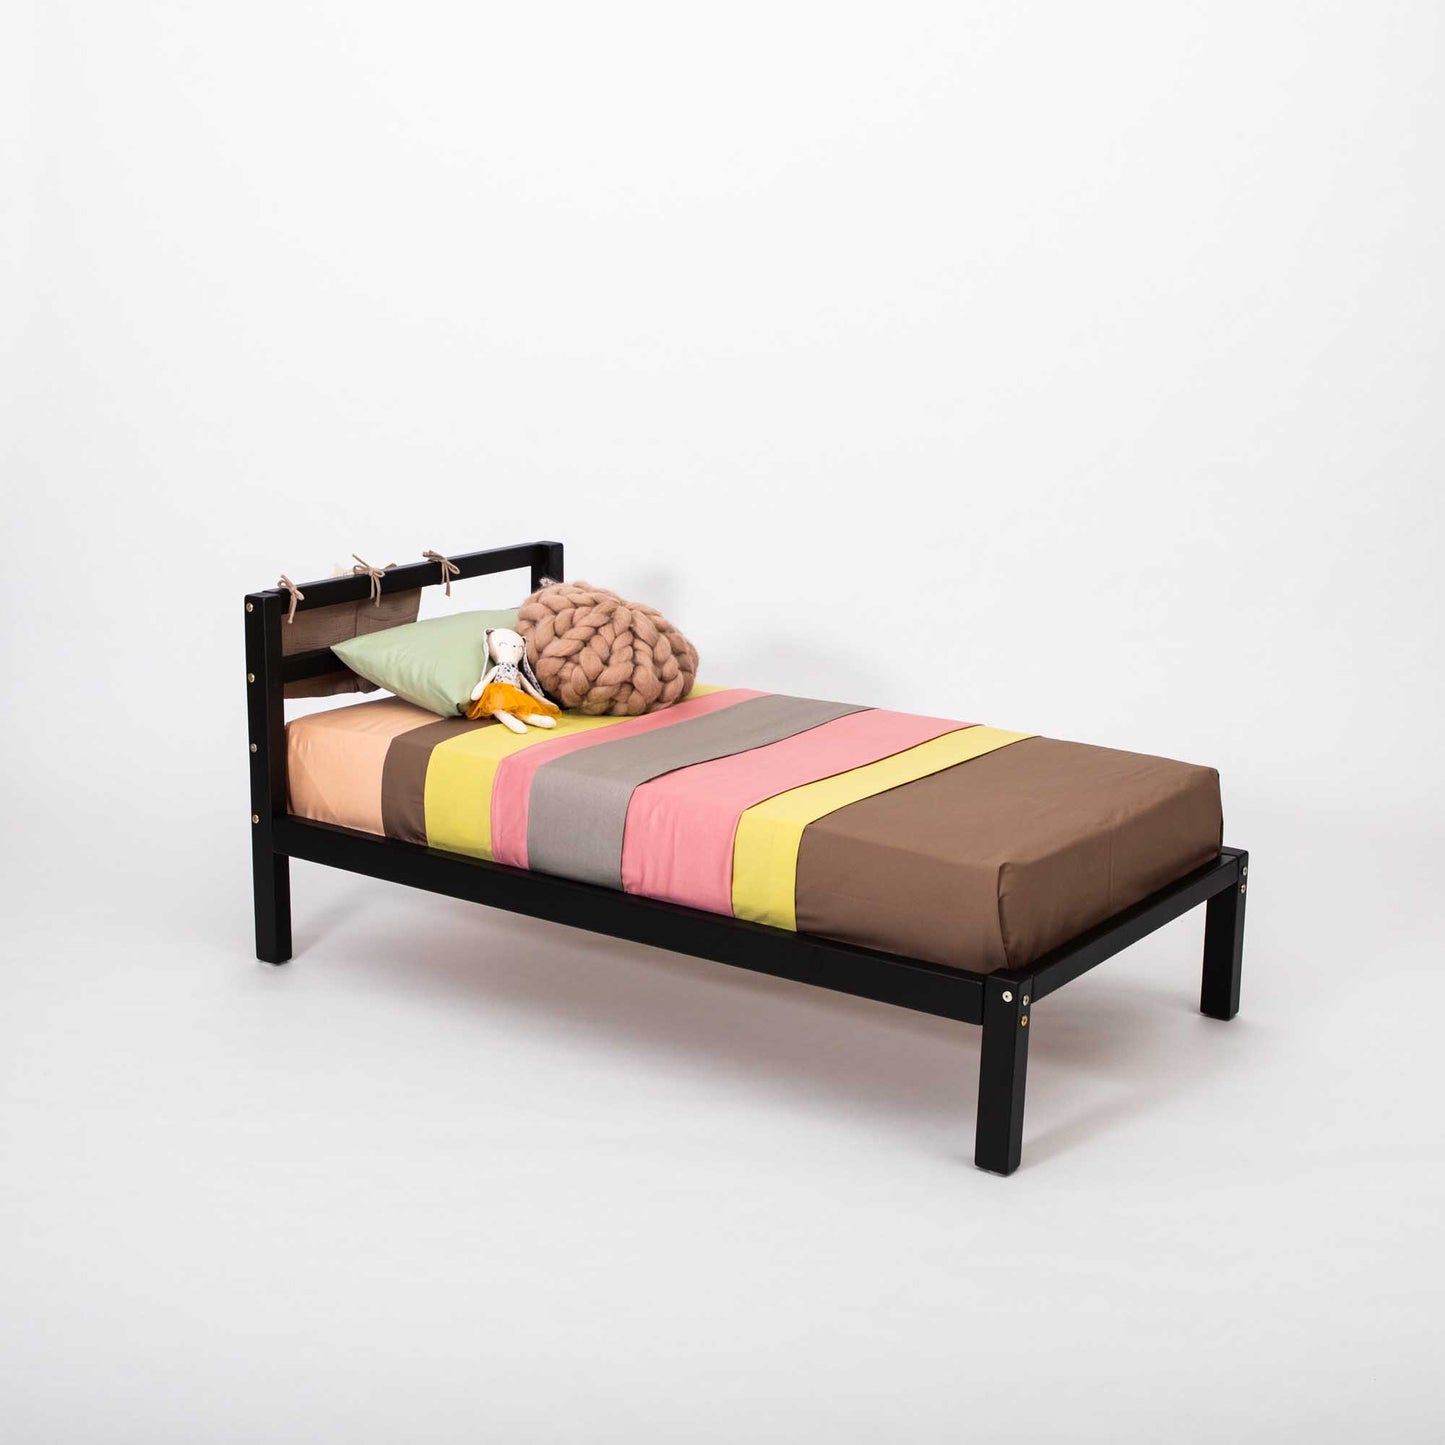 A small black bed with a colorful striped blanket, featuring the Sweet Home From Wood 2-in-1 transformable kids' bed with a horizontal rail headboard, that can grow with the child.